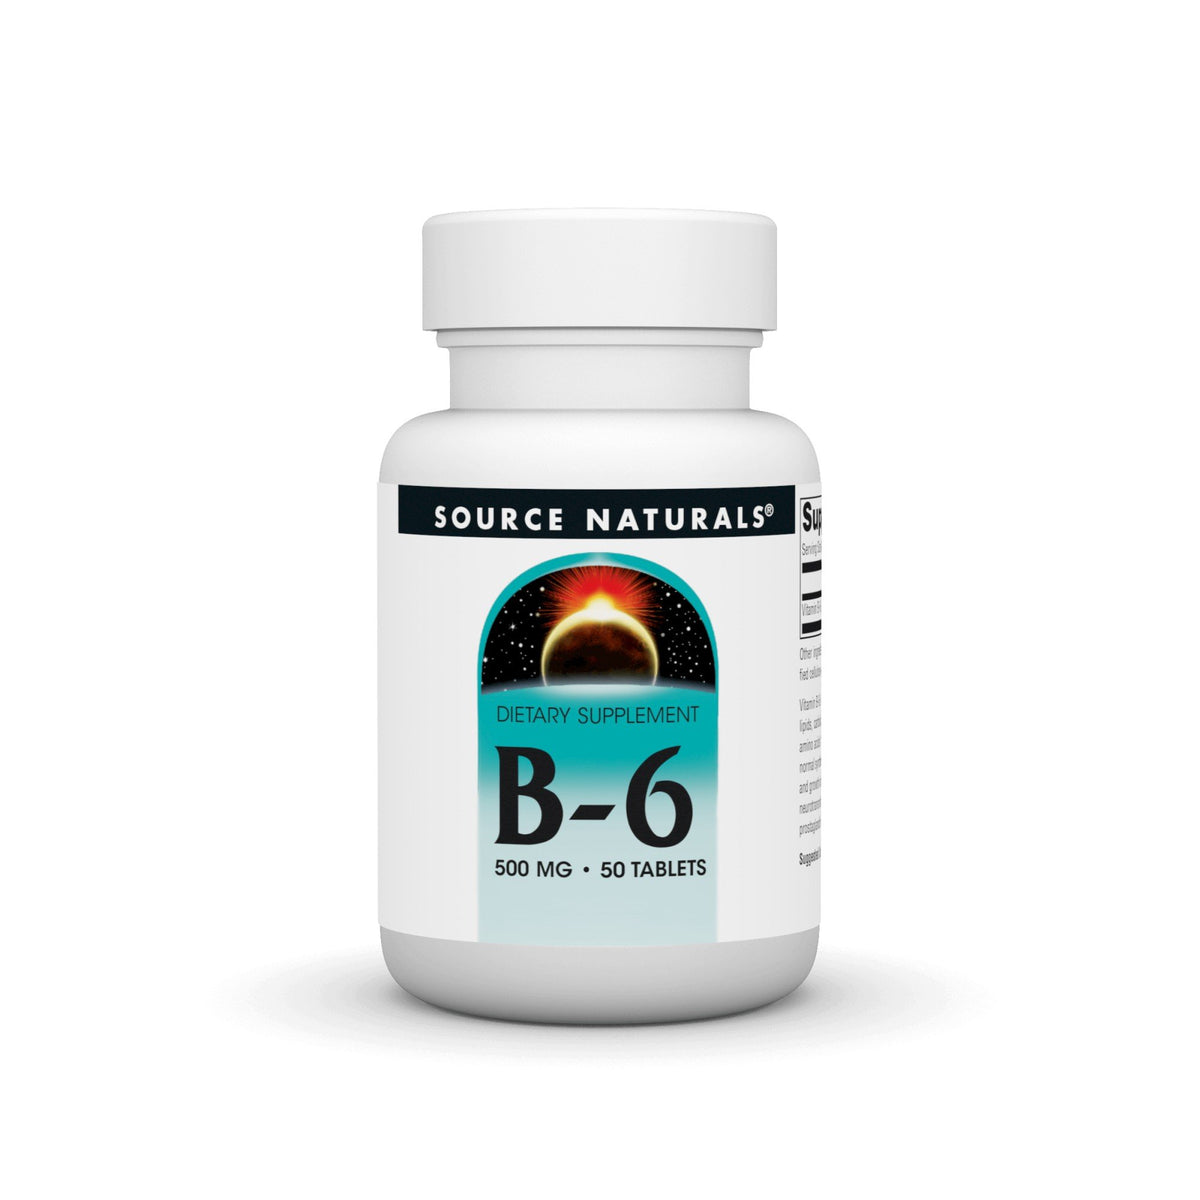 Source Naturals, Inc. Vitamin B-6 500mg 50 Sustained Release Tablet